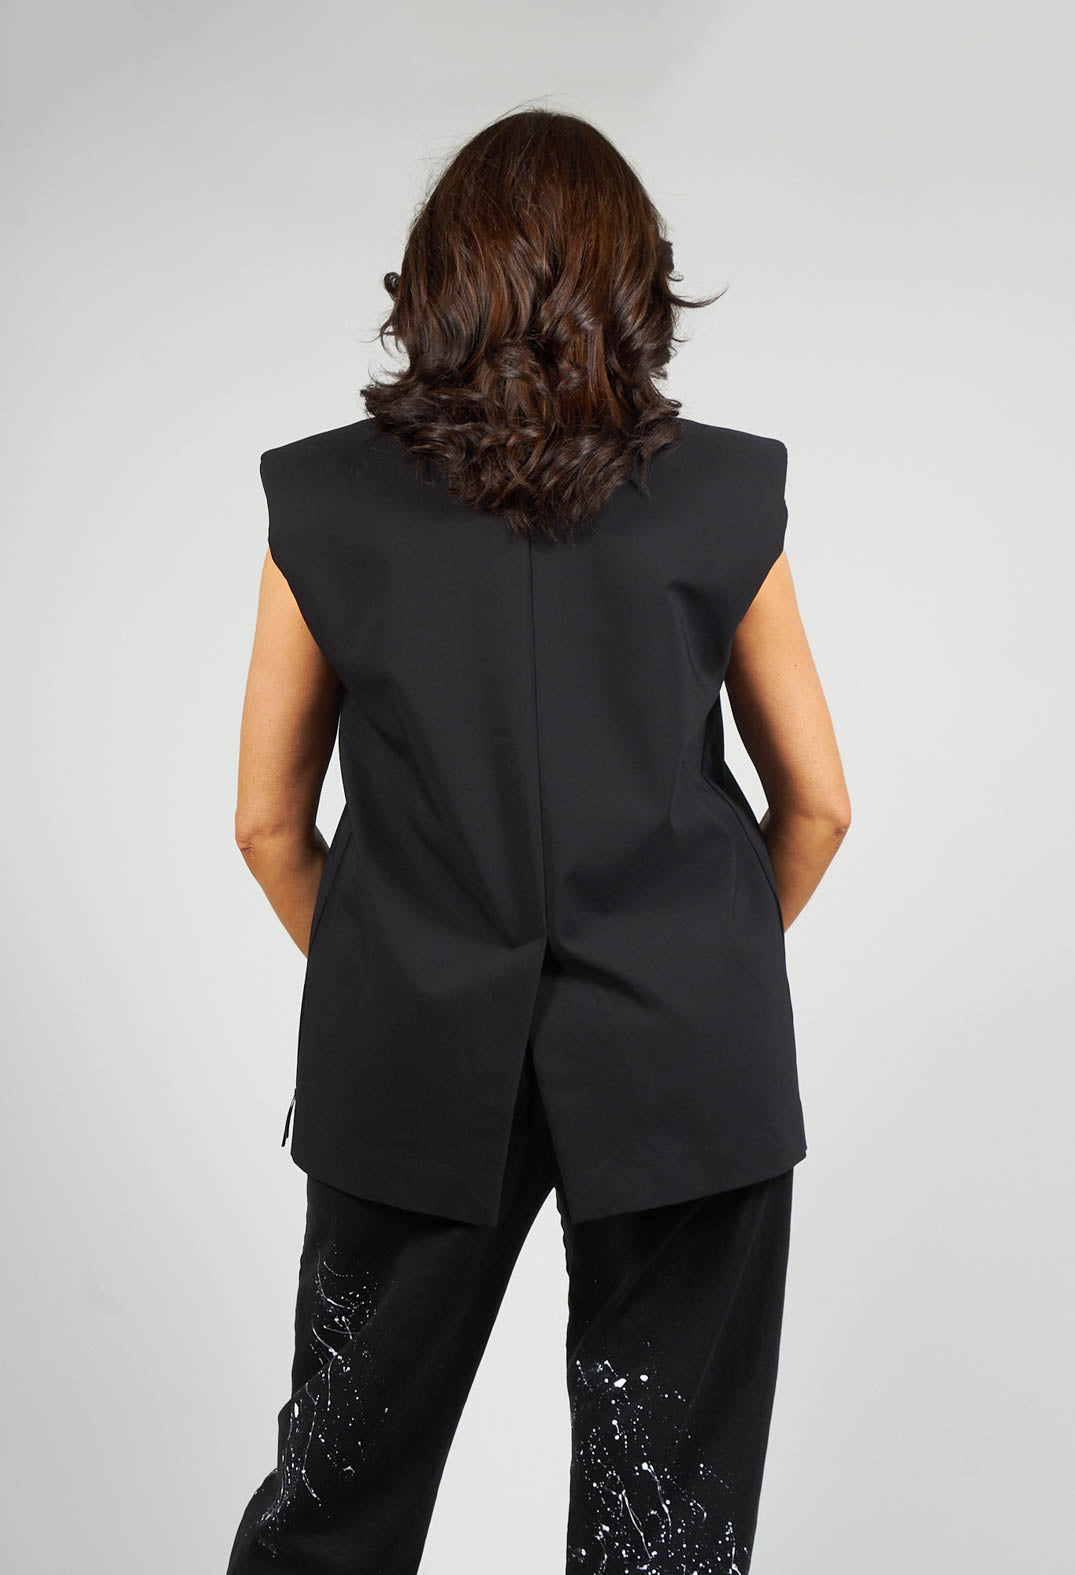 Waistcoat with Shoulder Pads in Black